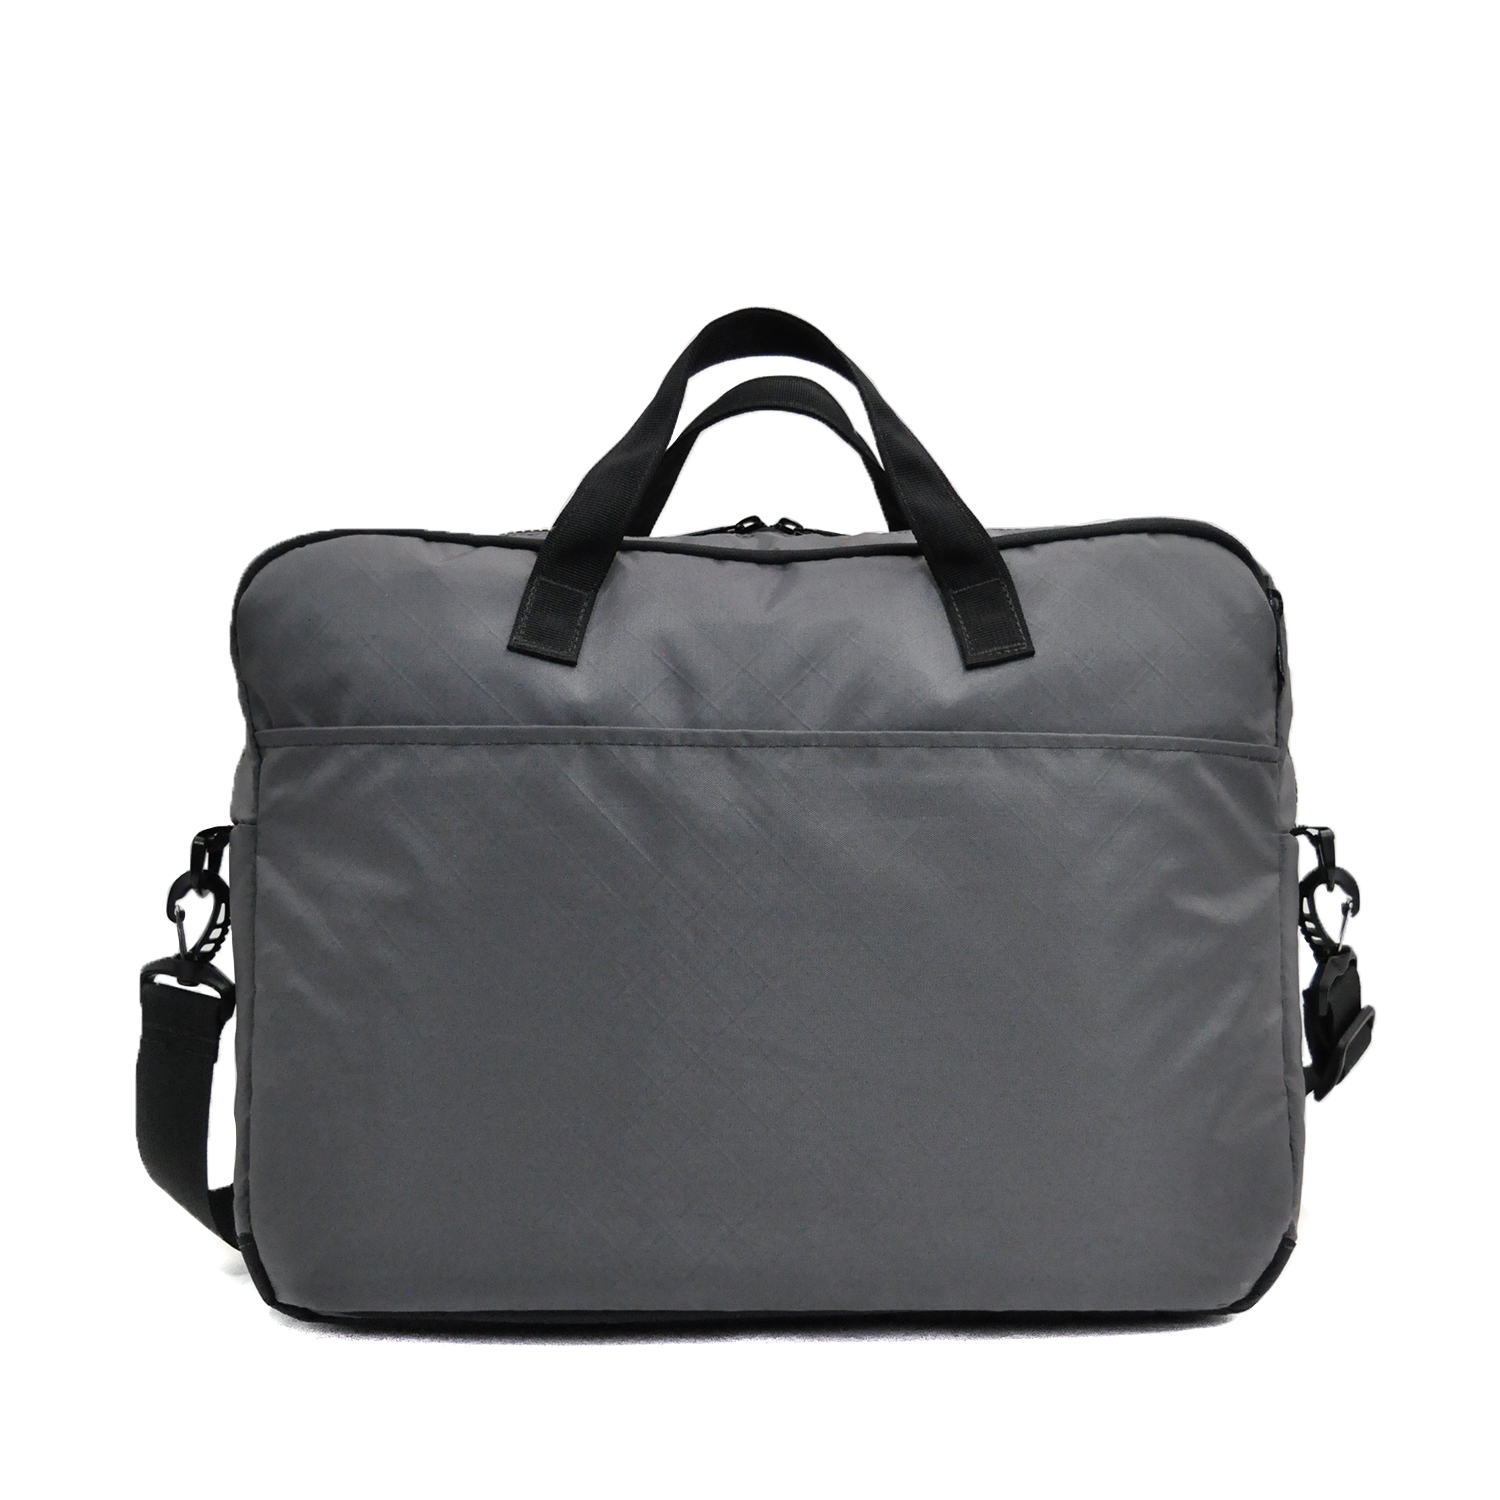 Flowfold Expedition Briefcase, Recycled Wolf Grey